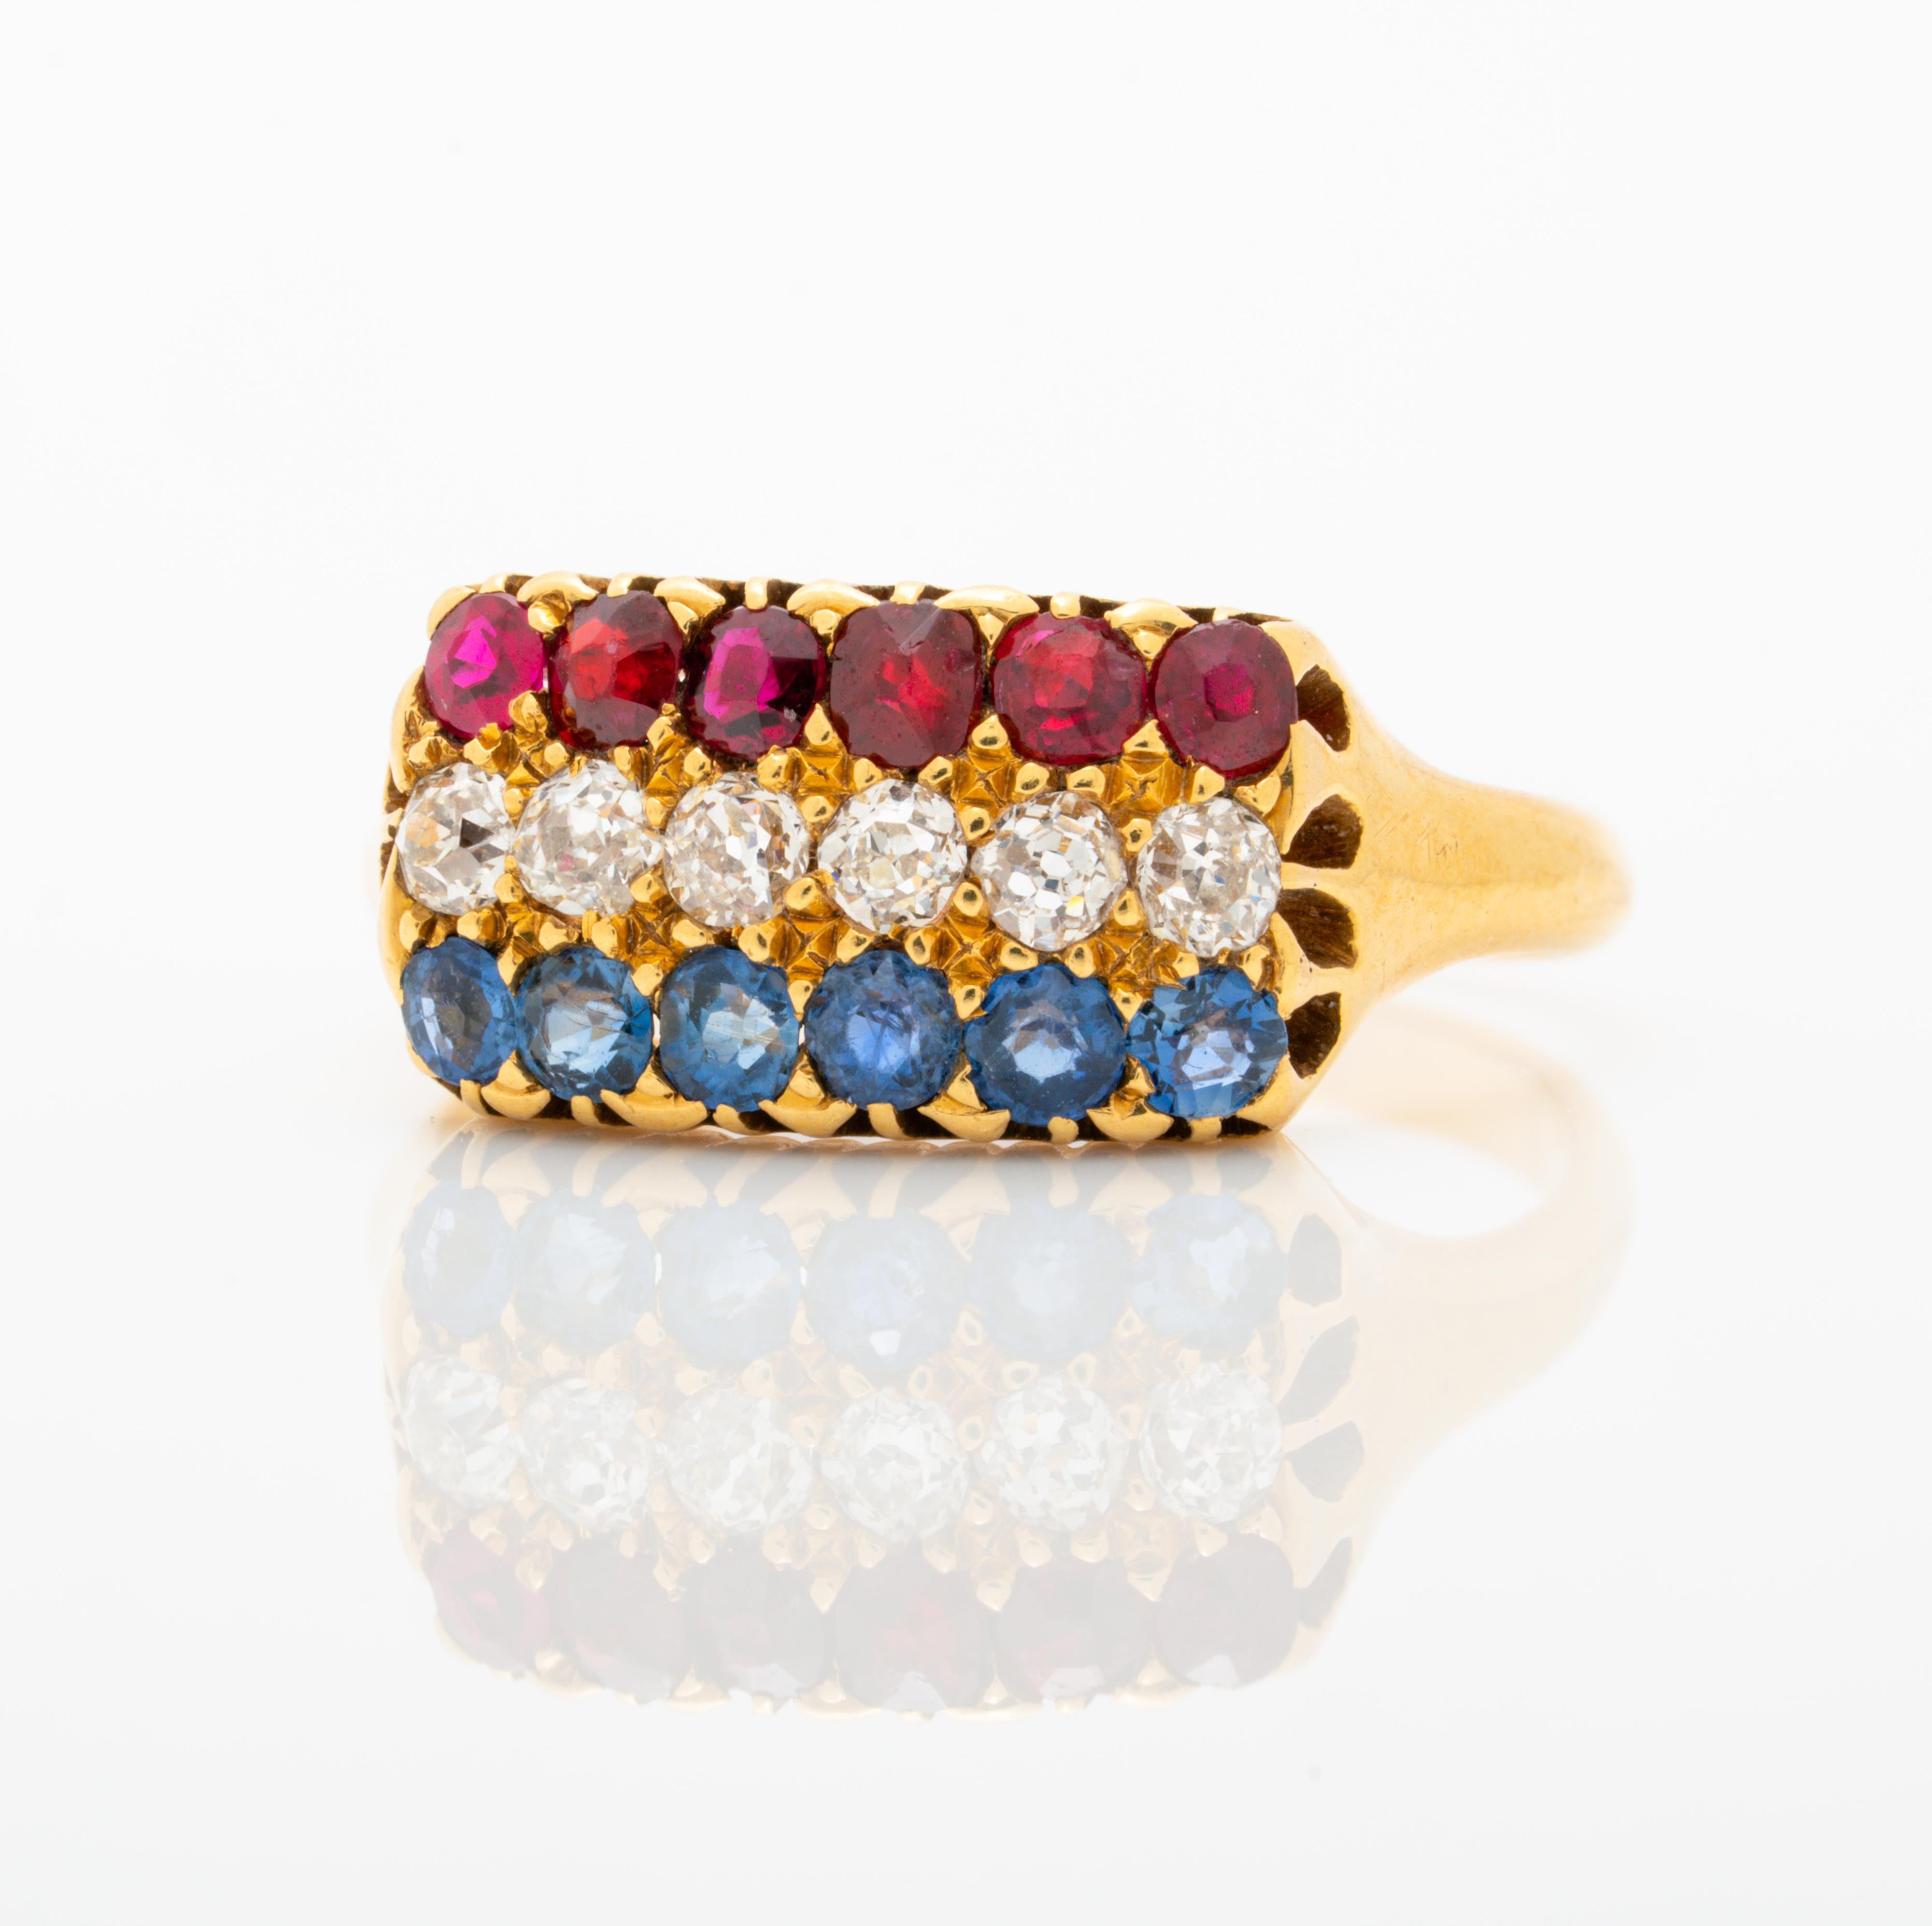 Antique French 18k Yellow Gold, Ruby and Sapphire Row Ring c. 1880

Period: c.1880
Material: 18k Yellow Gold, Diamond, Ruby and Sapphire
Weight: 3.82g
Current Ring Size: 6.5

 

We offer free ring sizing